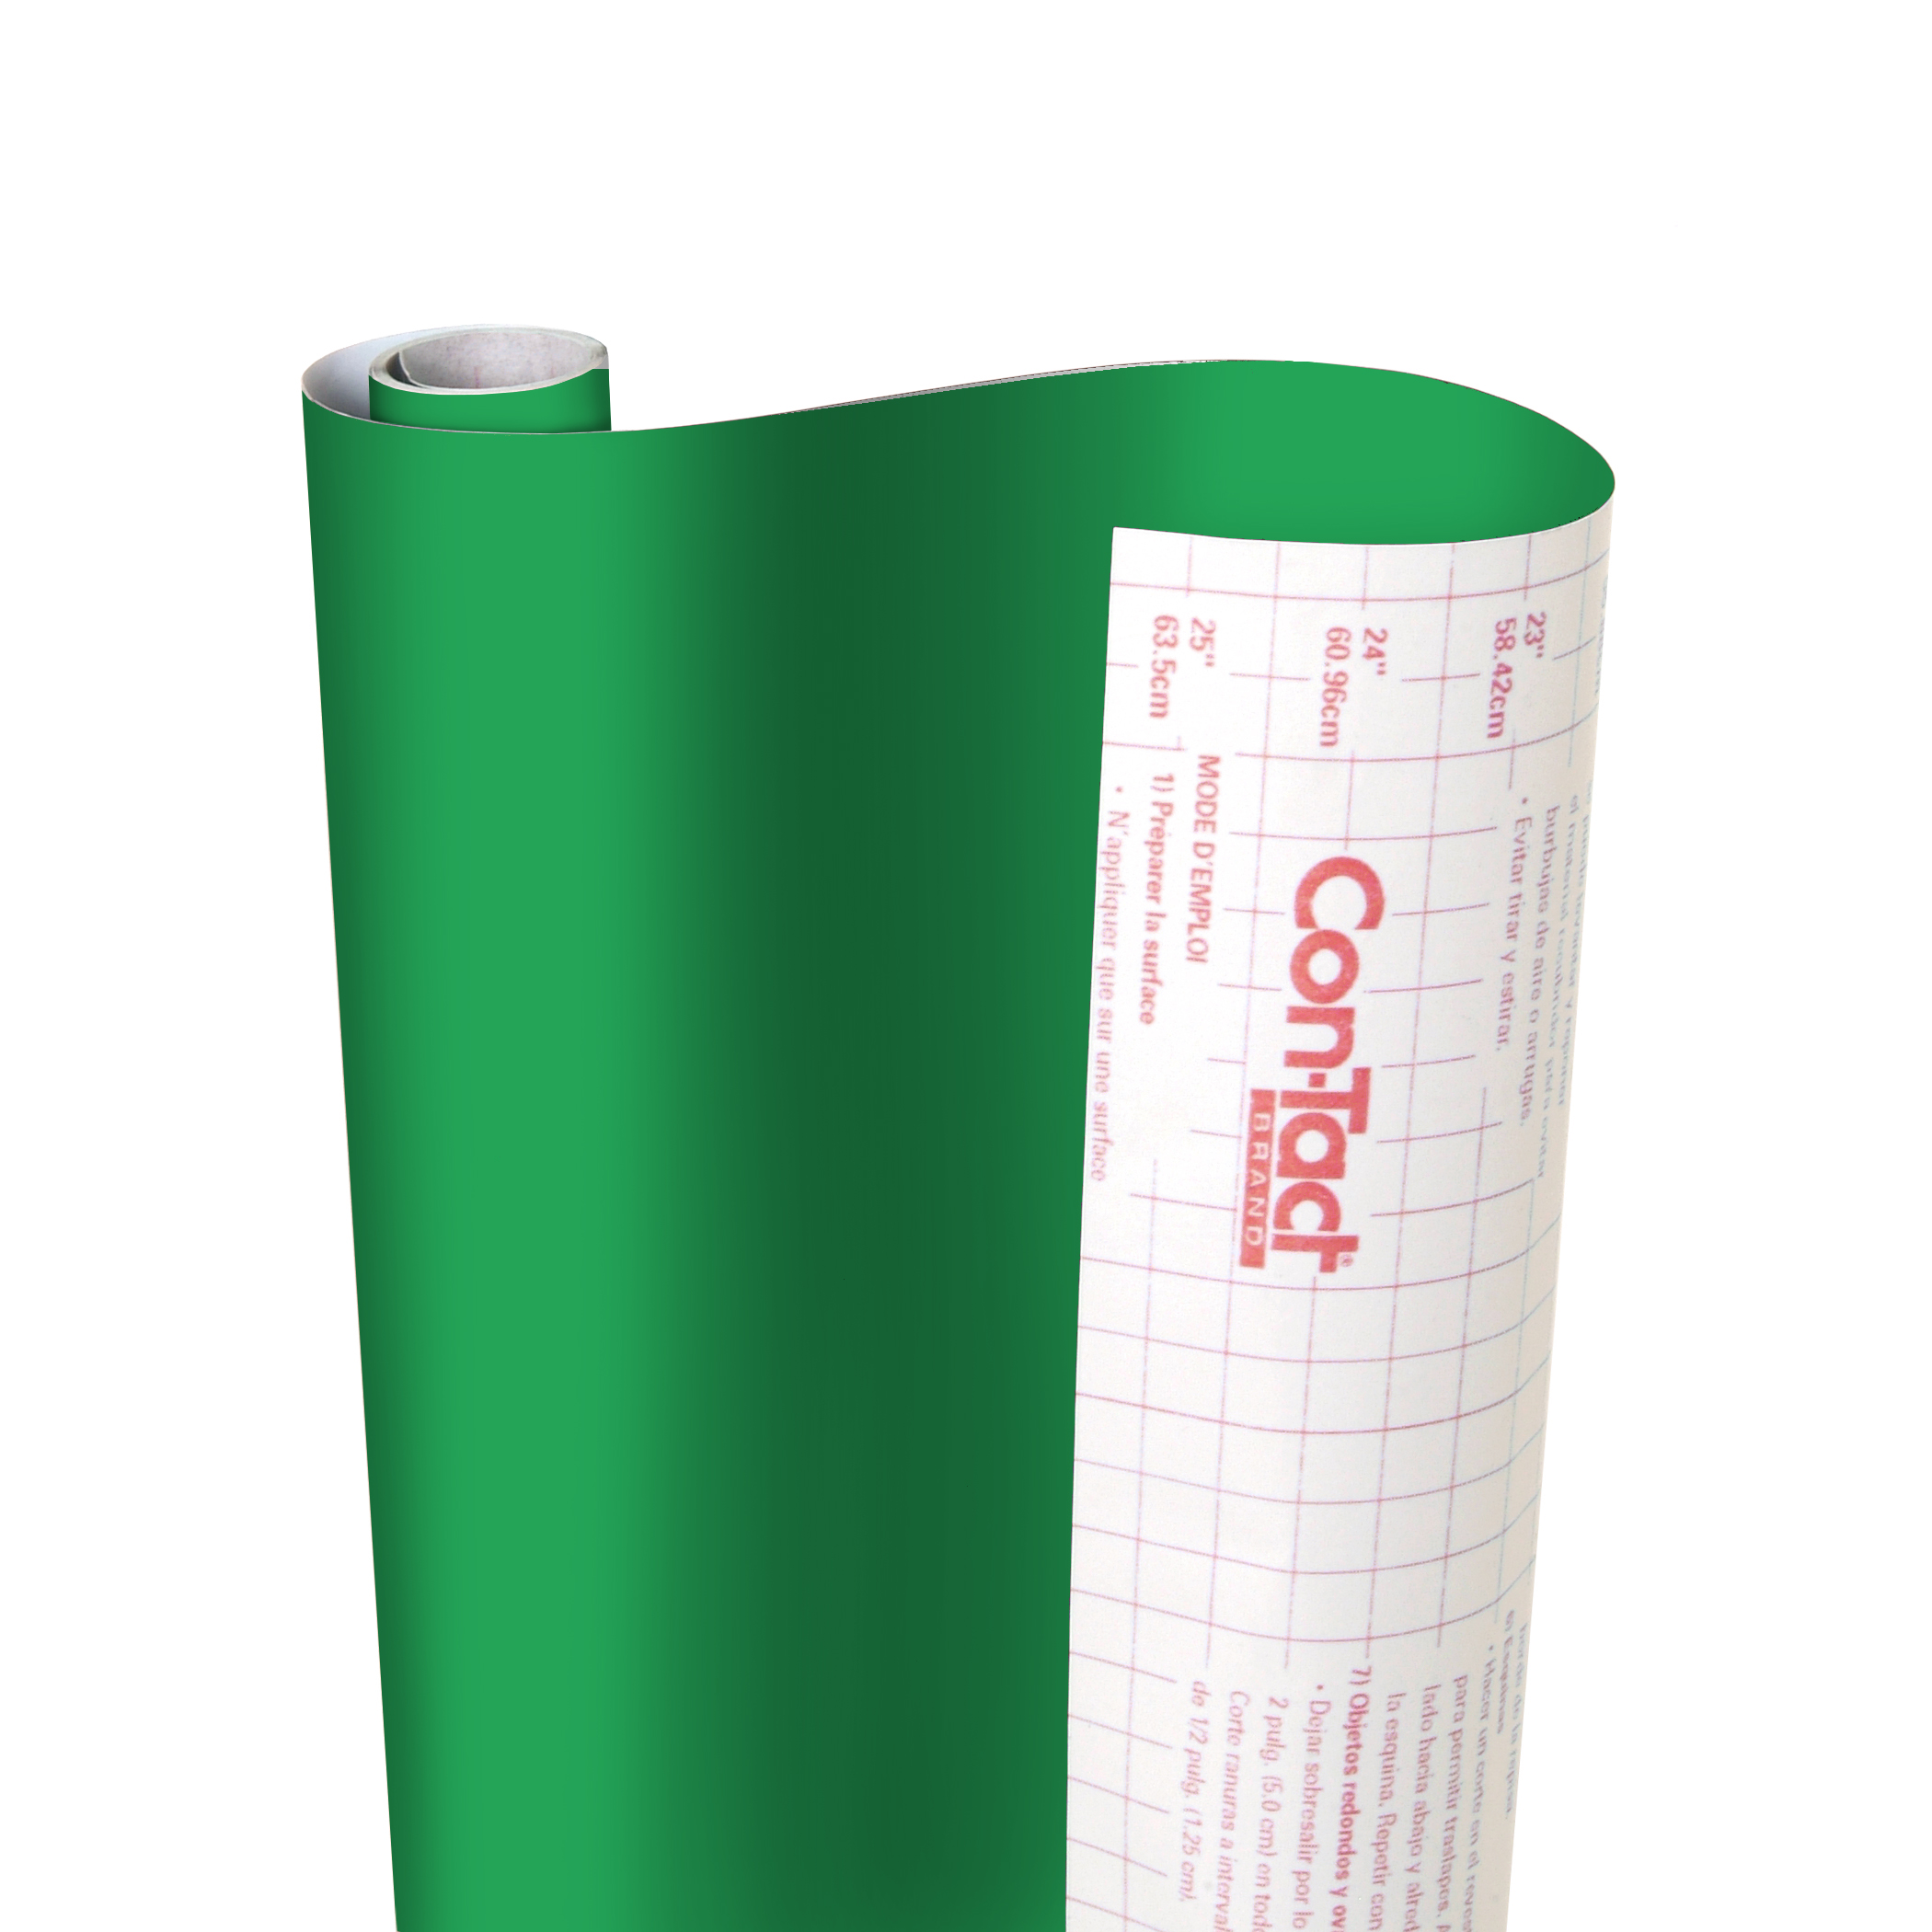 Con-Tact Brand' Vinyl'Creative Covering Self-Adhesive Shelf Liner, Kelly Green - image 1 of 6